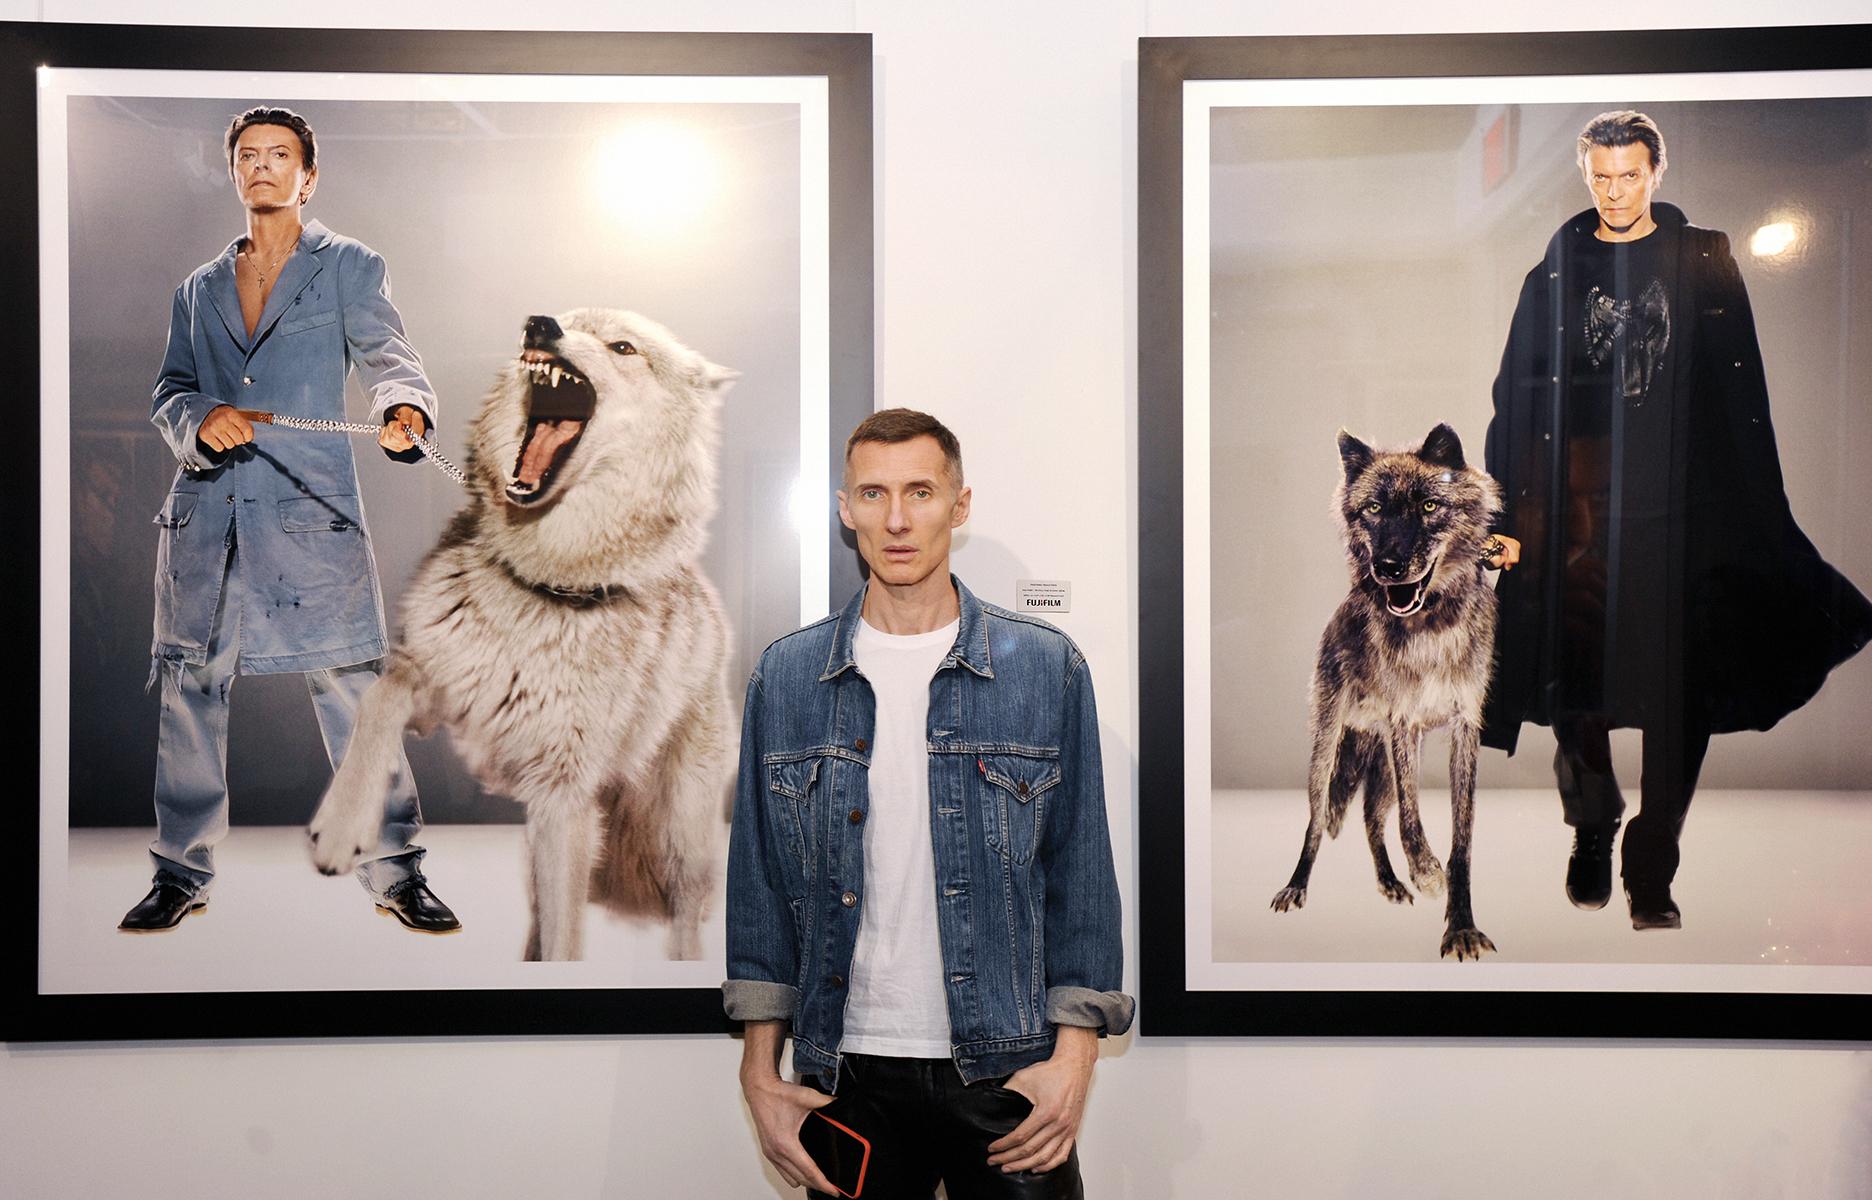 Natural Villains - superstar David Bowie in black clothing with wolf - Photograph by Markus Klinko